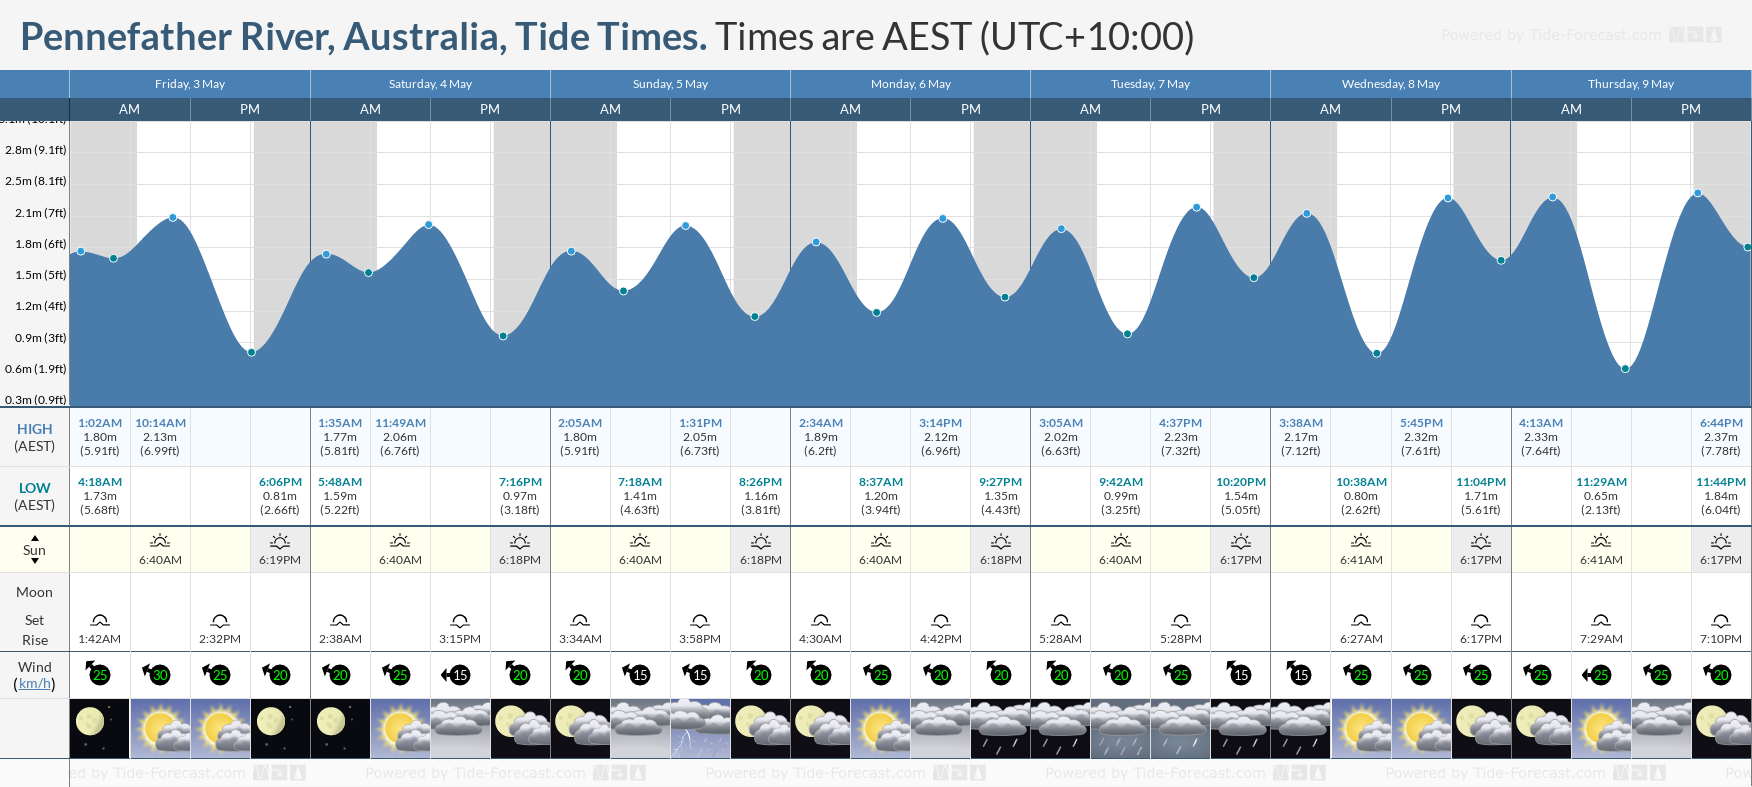 Pennefather River, Australia Tide Chart including high and low tide tide times for the next 7 days